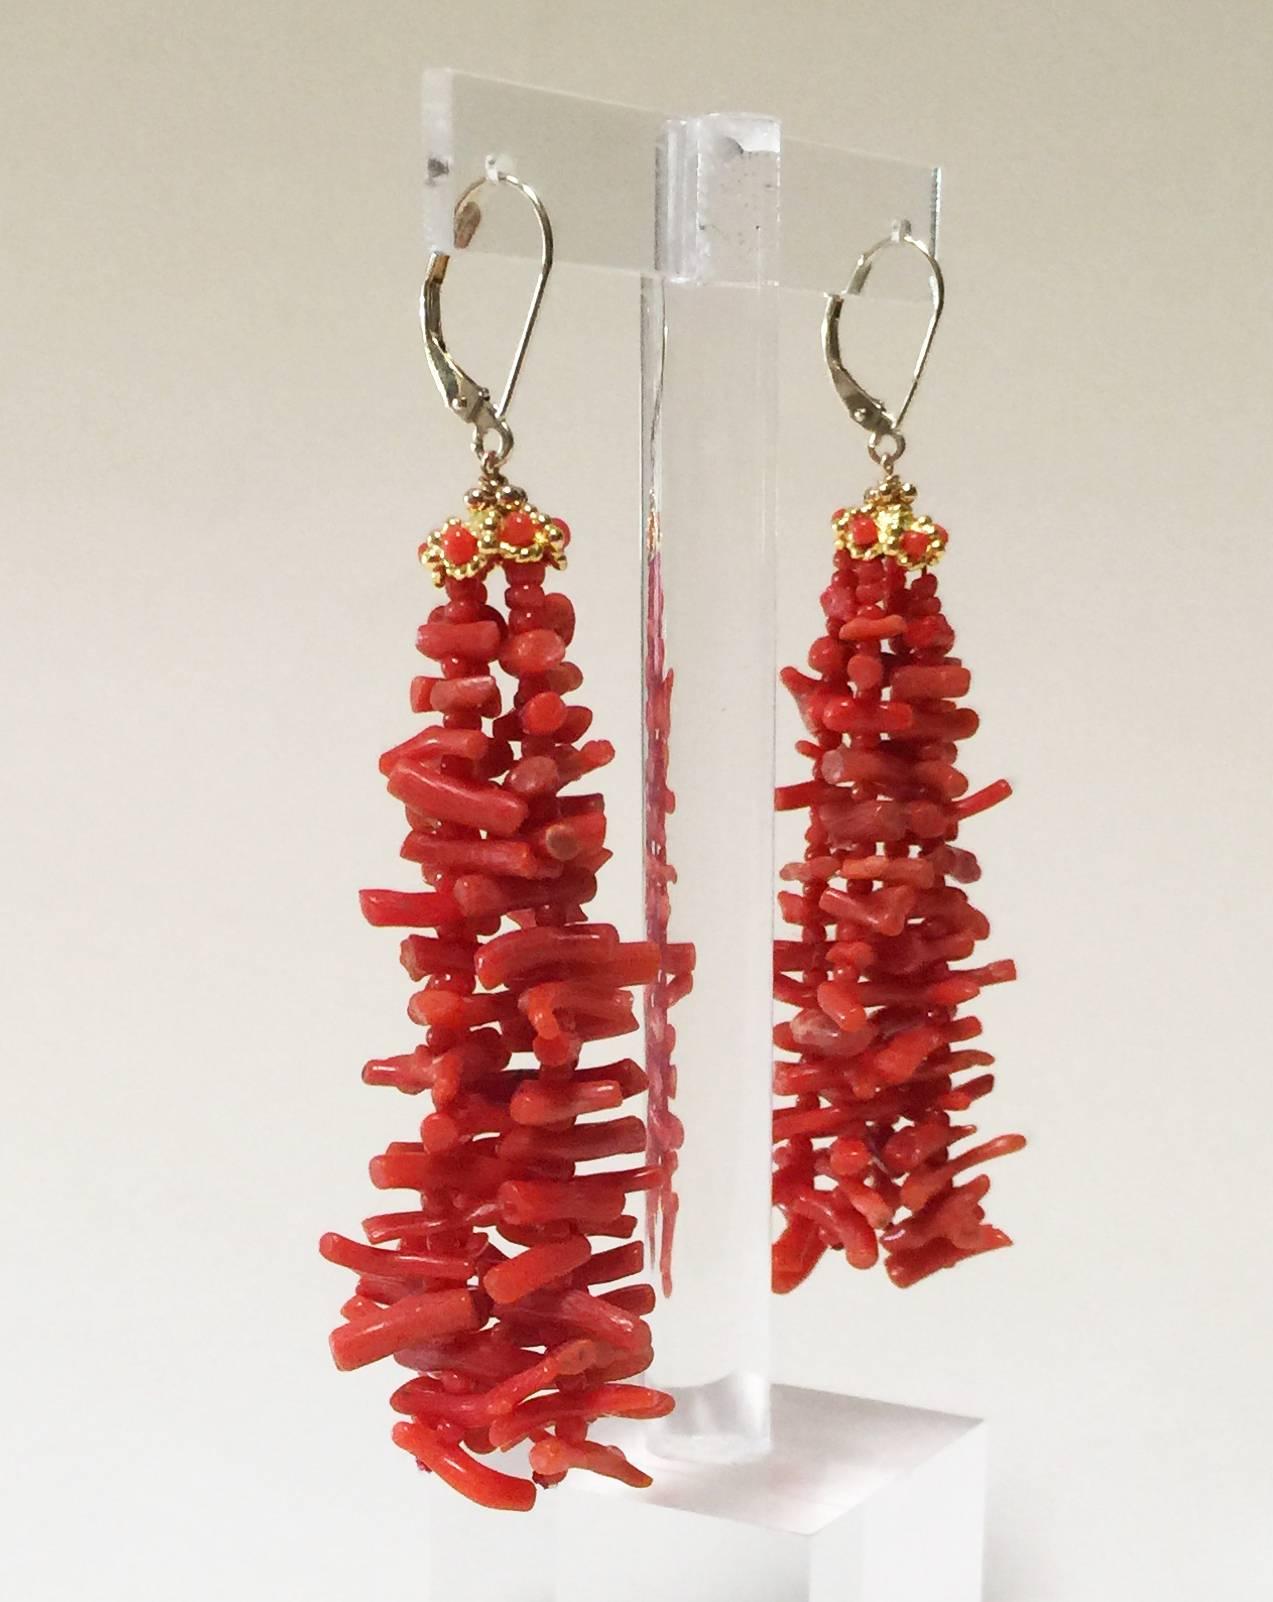 These coral tassel earrings are dynamic and vibrant. At 3 inches they frame the face perfectly. Each strand has a graduated pattern of and elongated coral bead and small round coral bead to create a gorgeous and elegant composition. On top of the